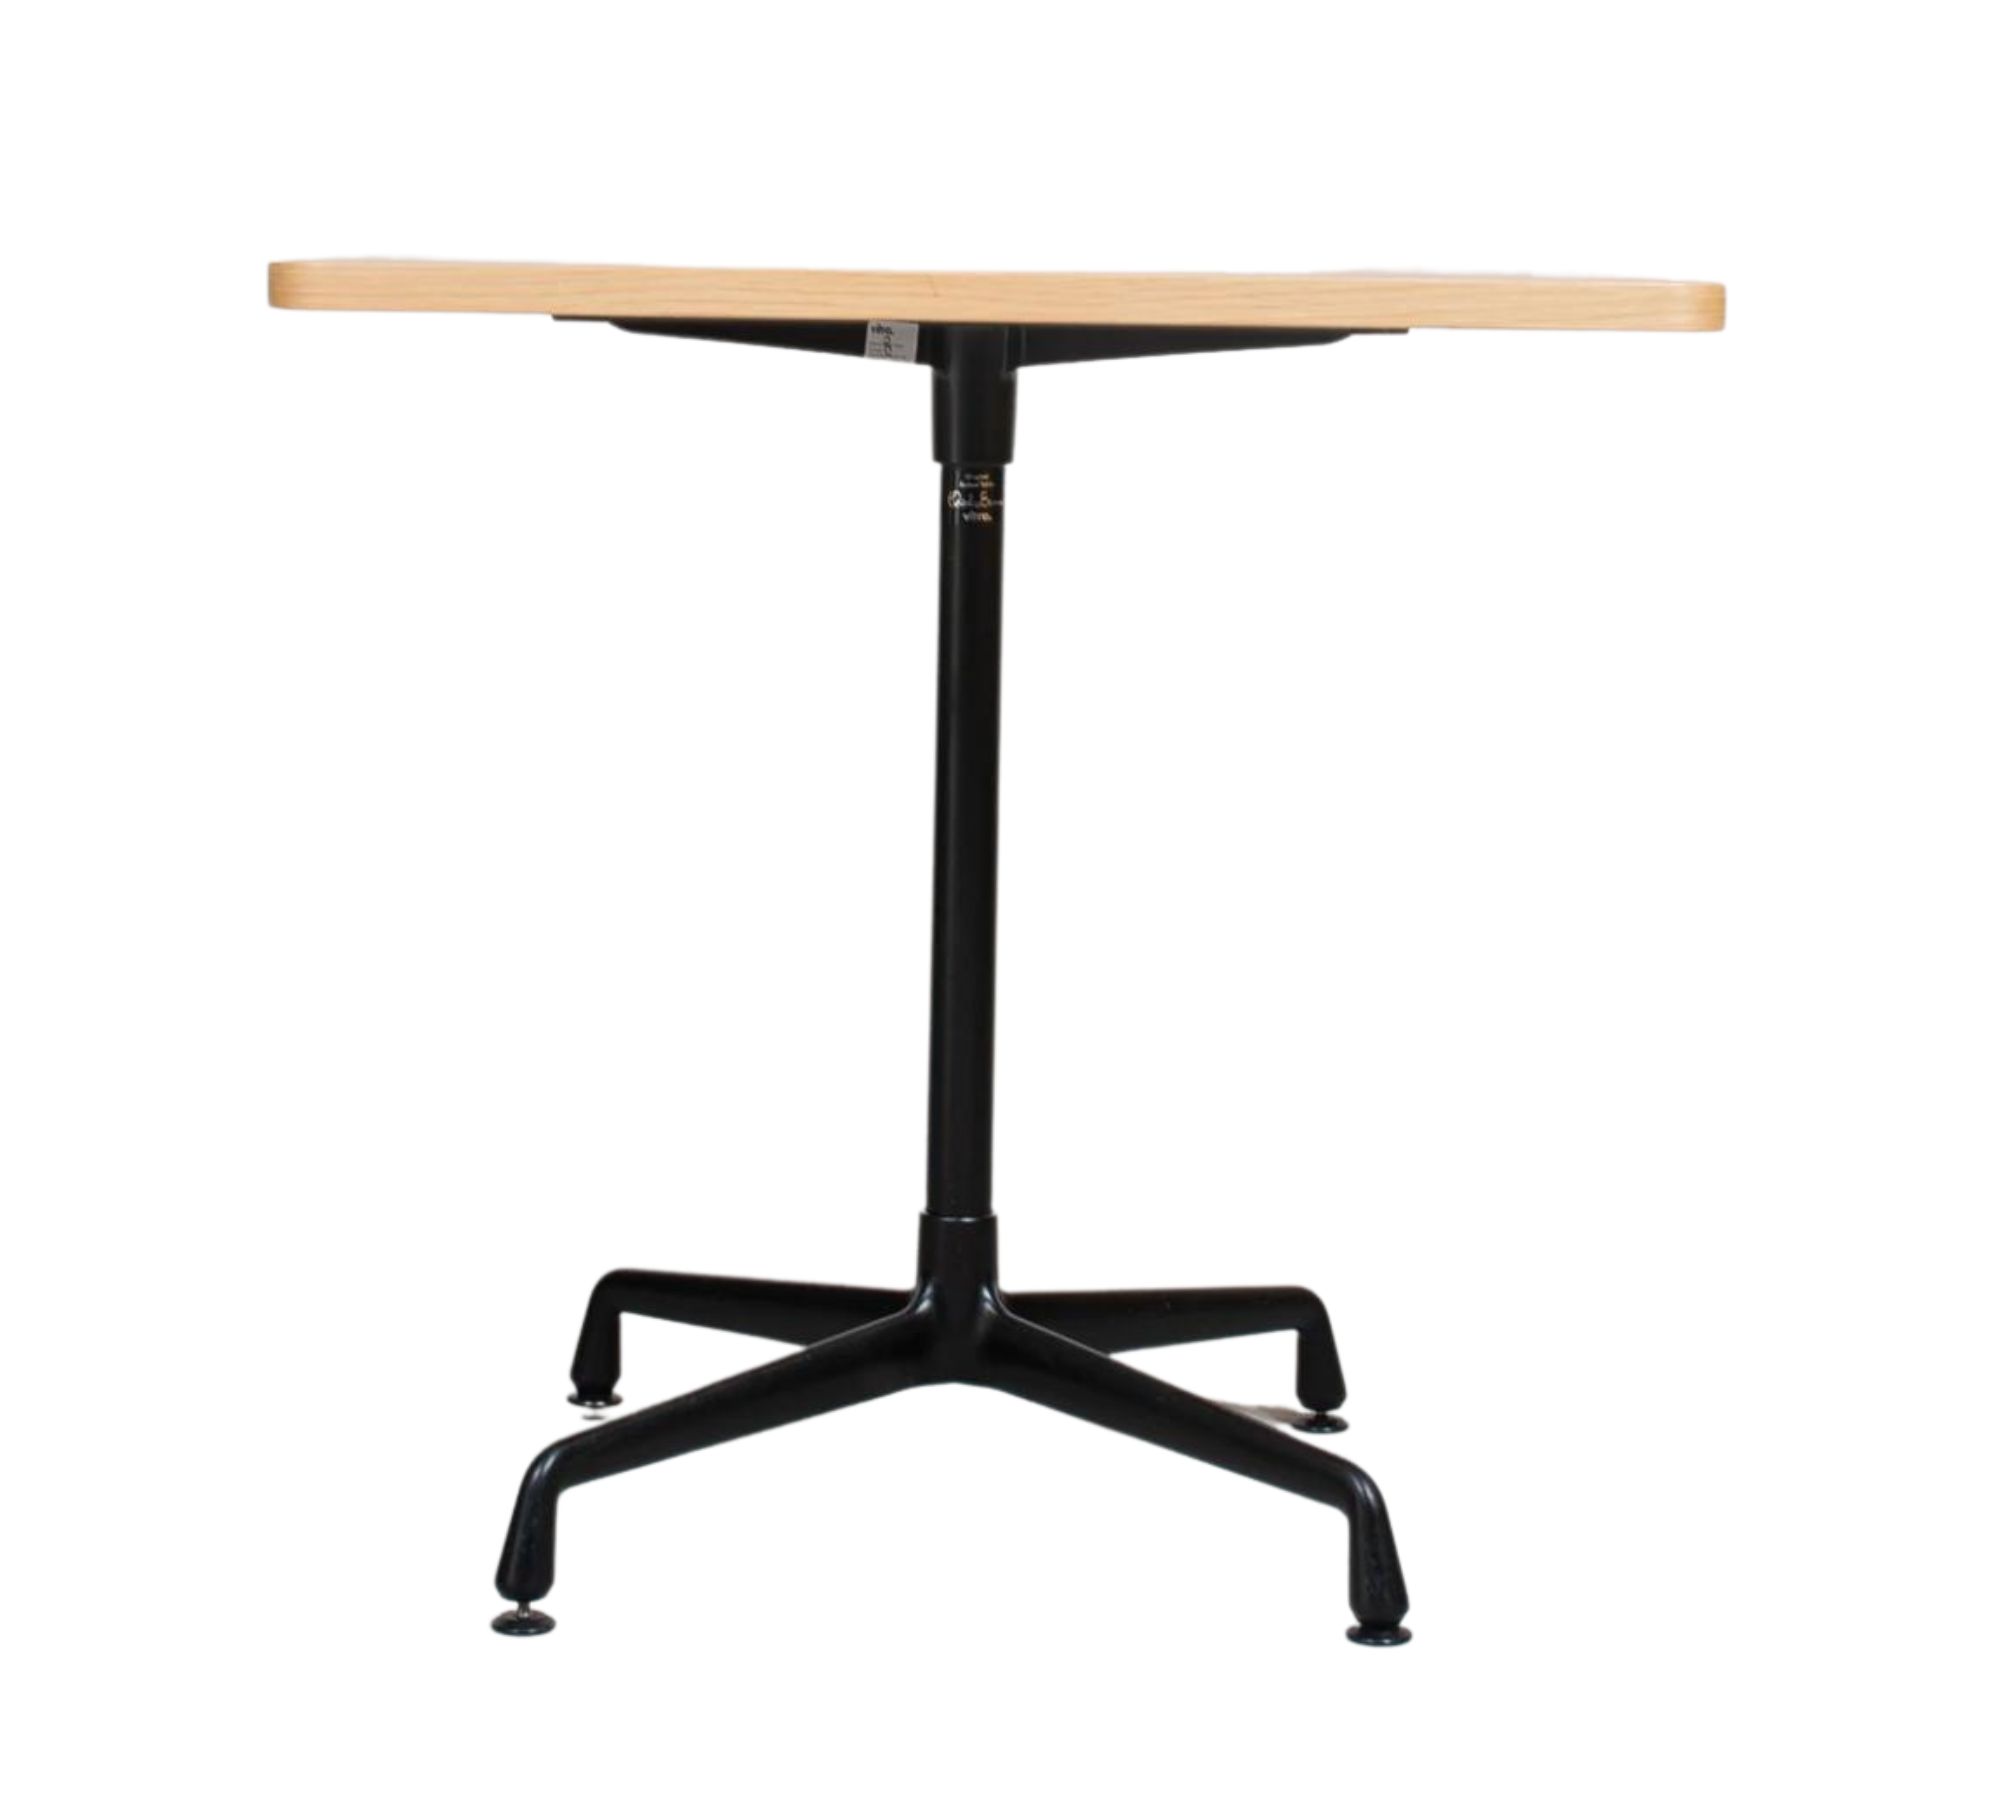 Eames Contract Table Braun Eckig